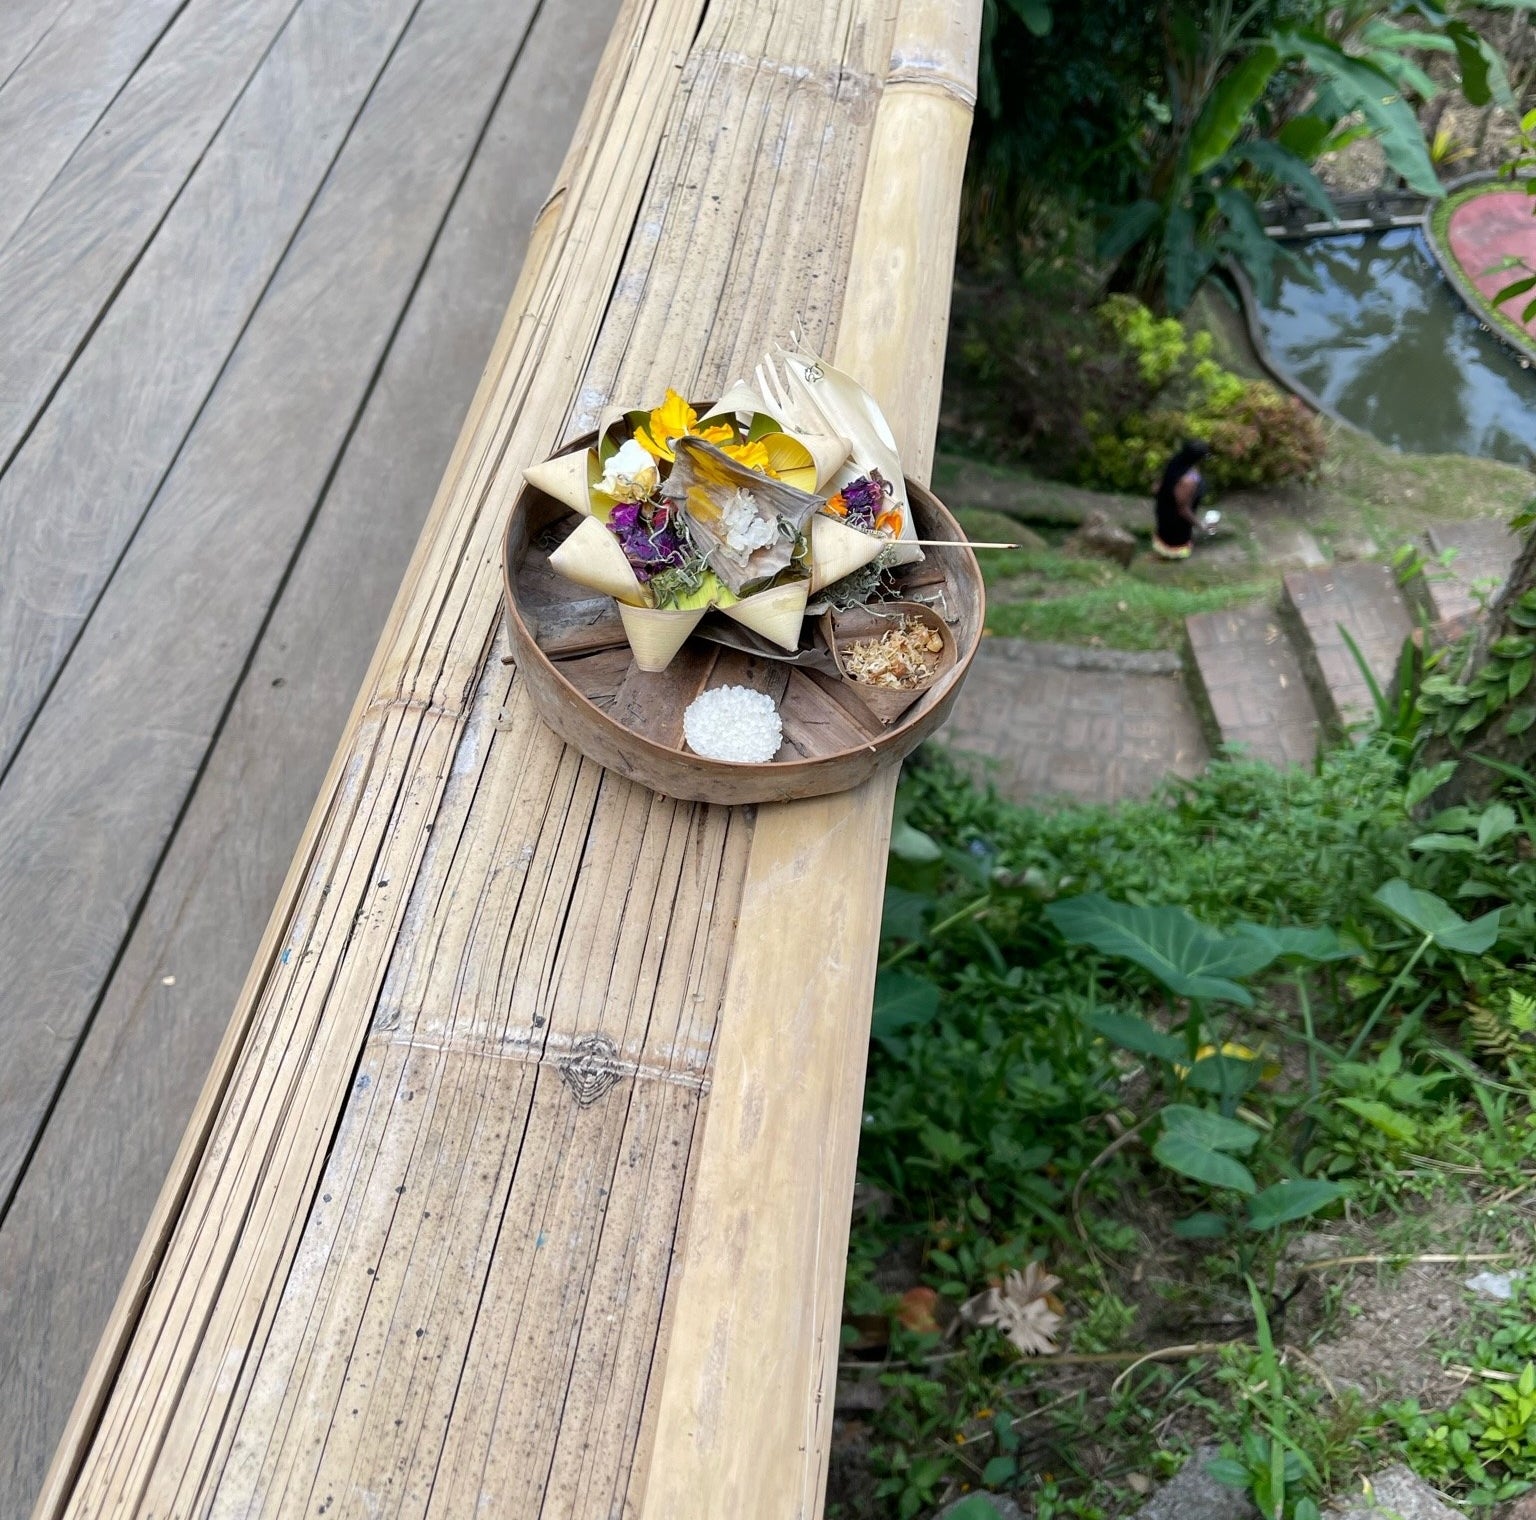 a &quot;Canang Sari&quot; or Balinese offering for the Gods